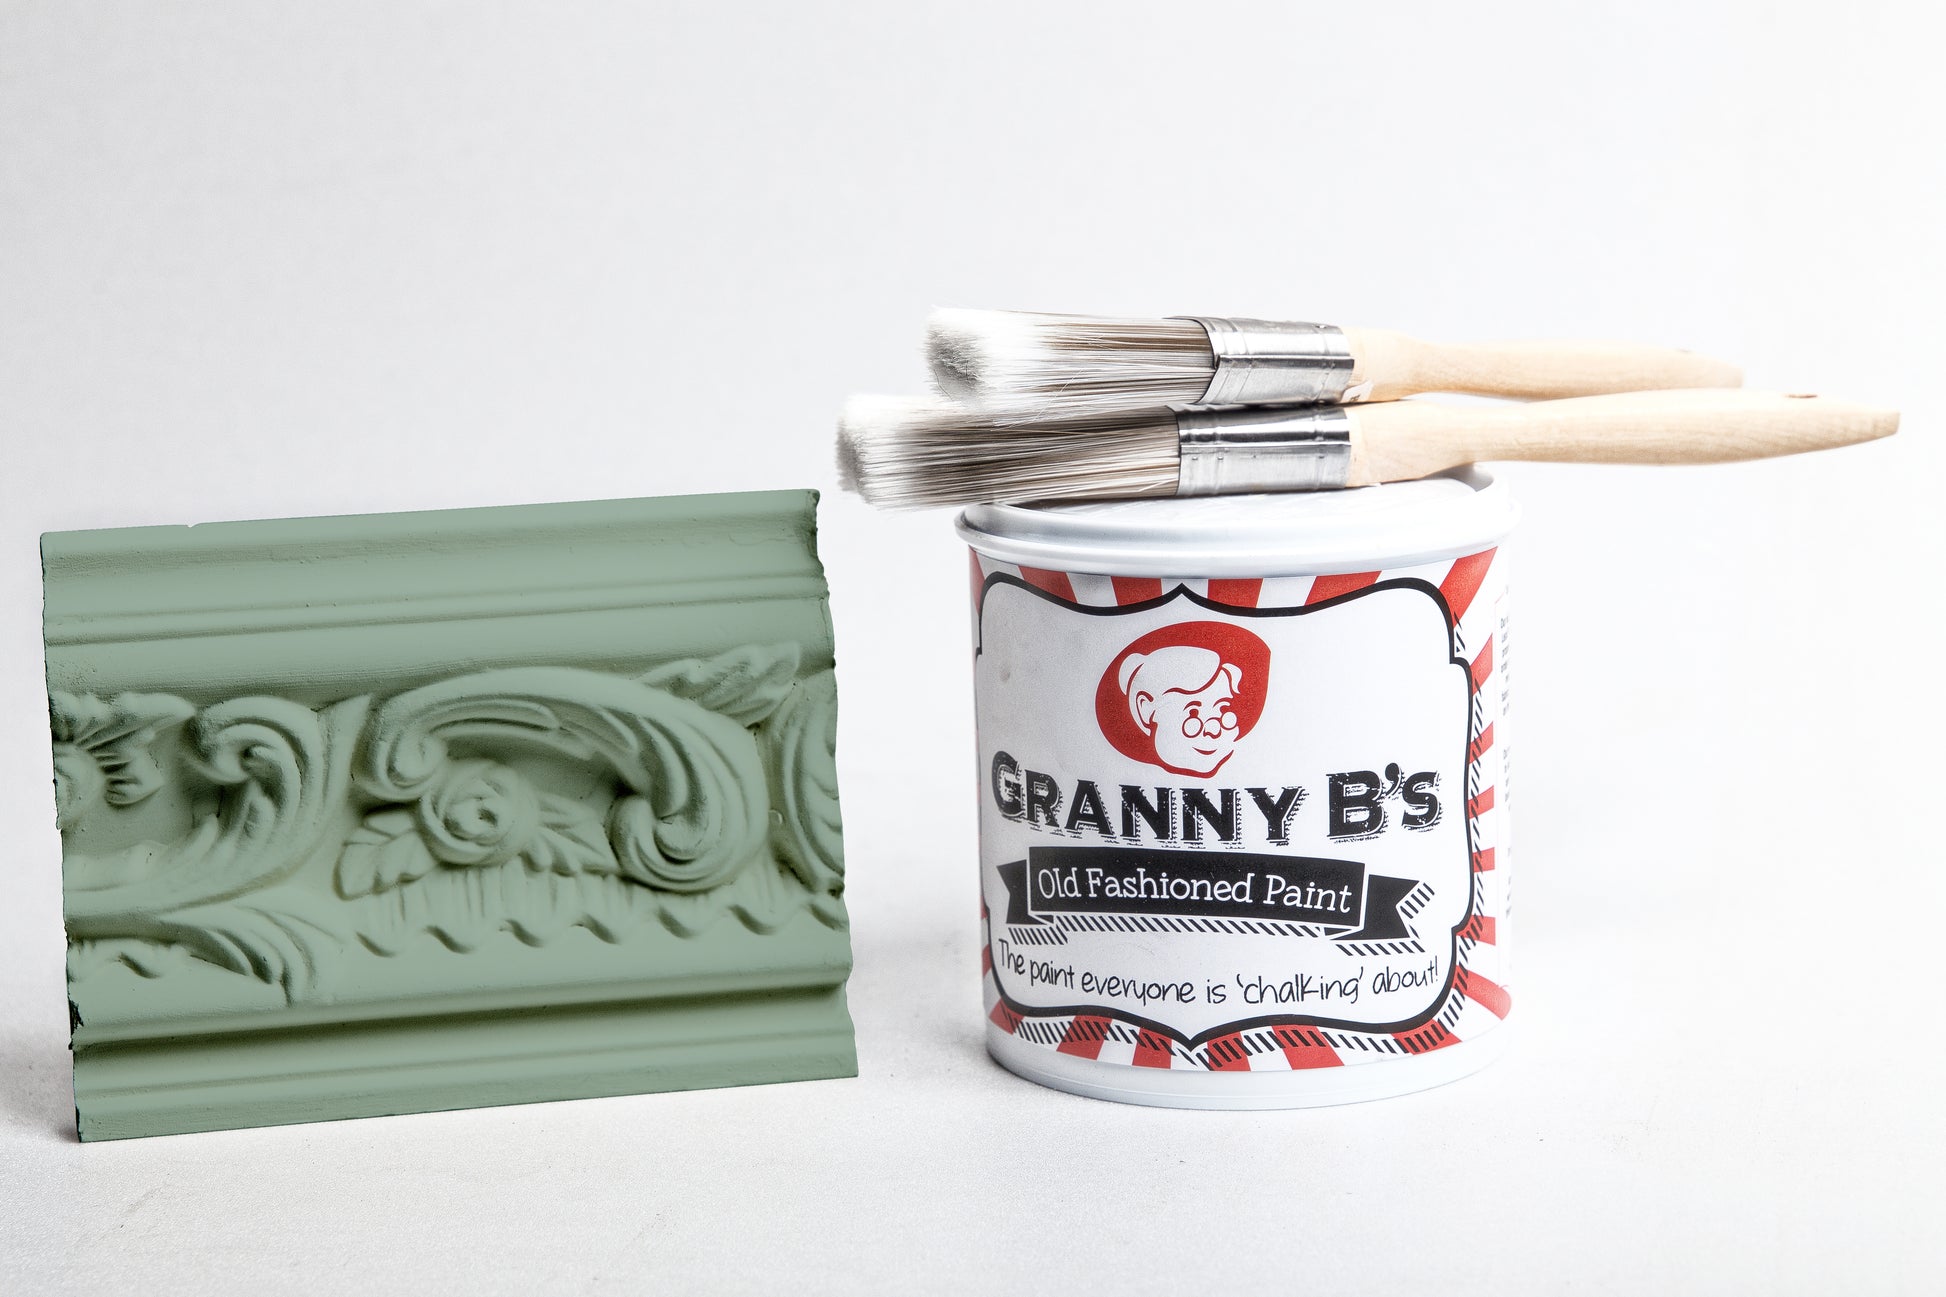 Old Fashioned Paint - EverGreen - Granny B's Old Fashioned Paint